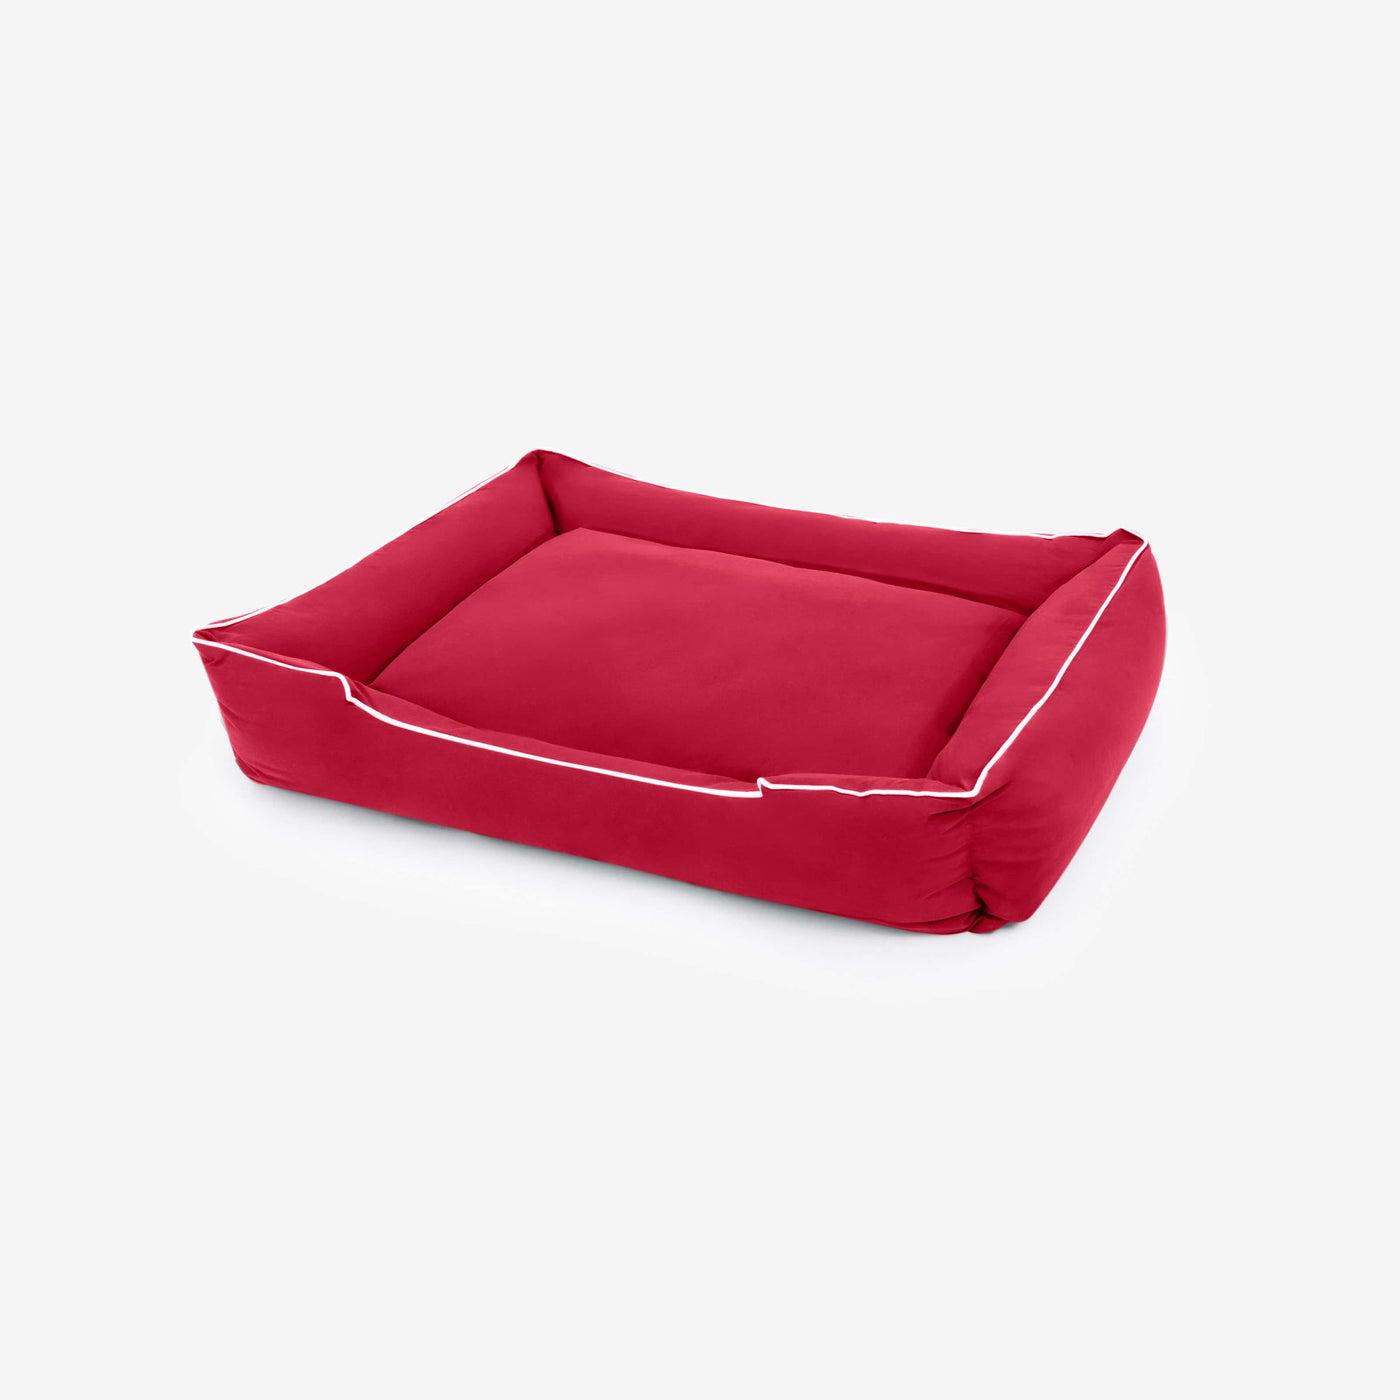 Woofoo Water Repellant Pet Bed, Red, Large Pet Beds sazy.com